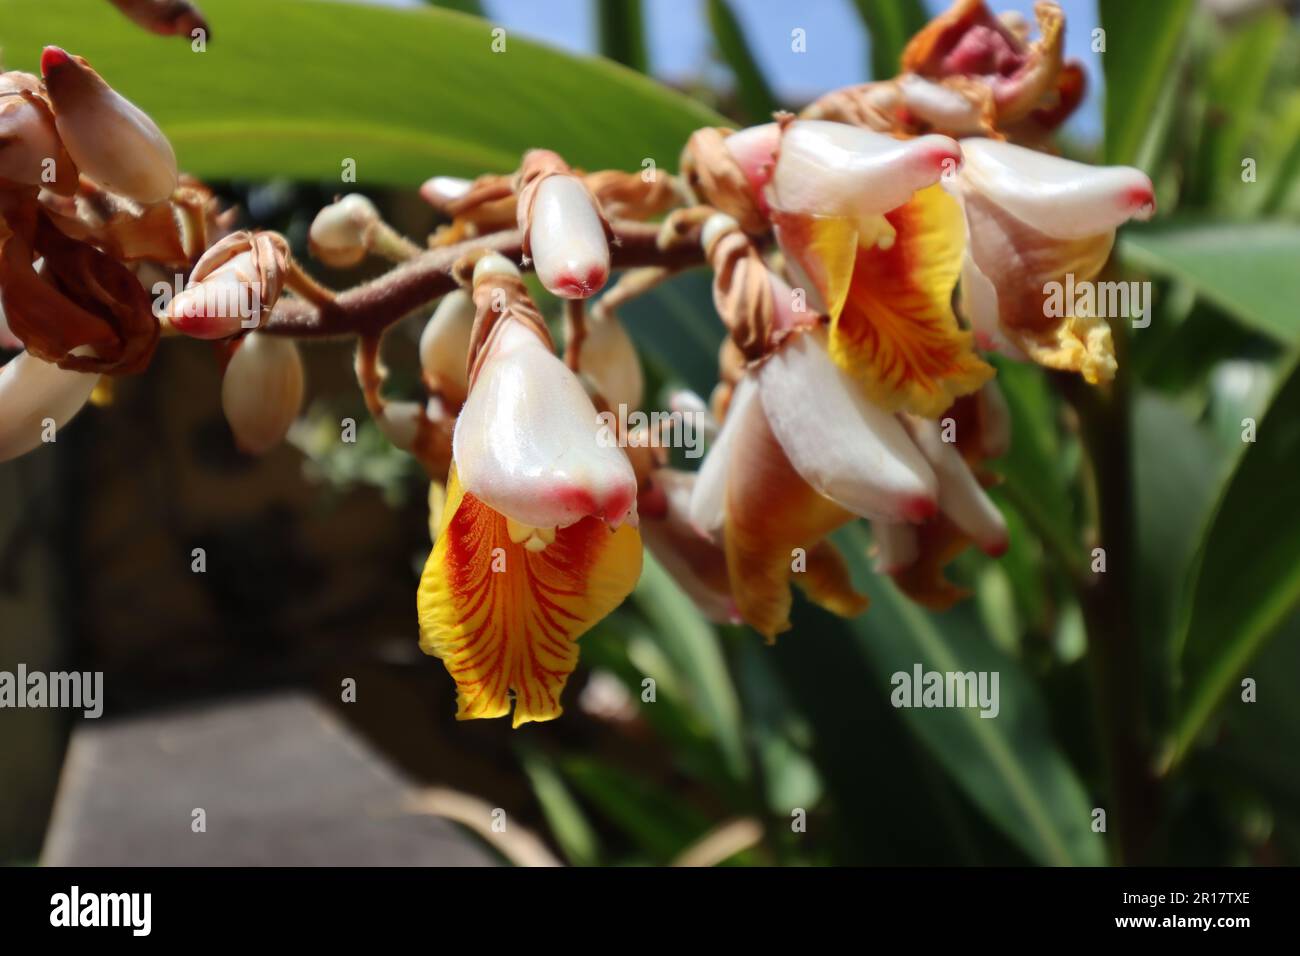 Flowers of shell ginger (Alpinia zerumbet) in close-up Stock Photo